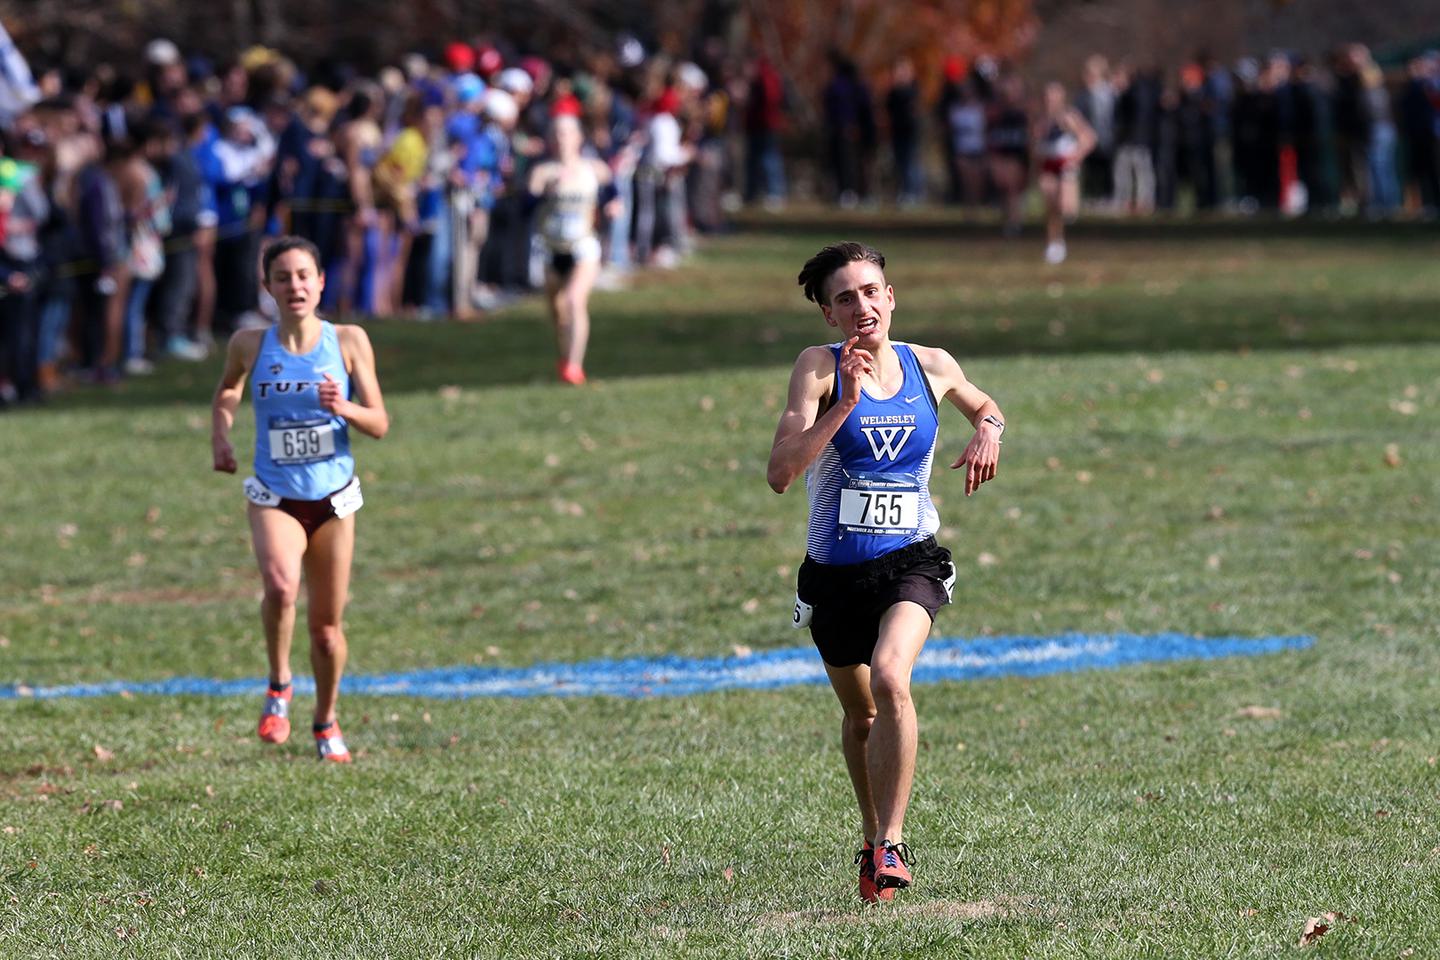 Senior Ari Marks sprints toward the finish line during a cross country competition.